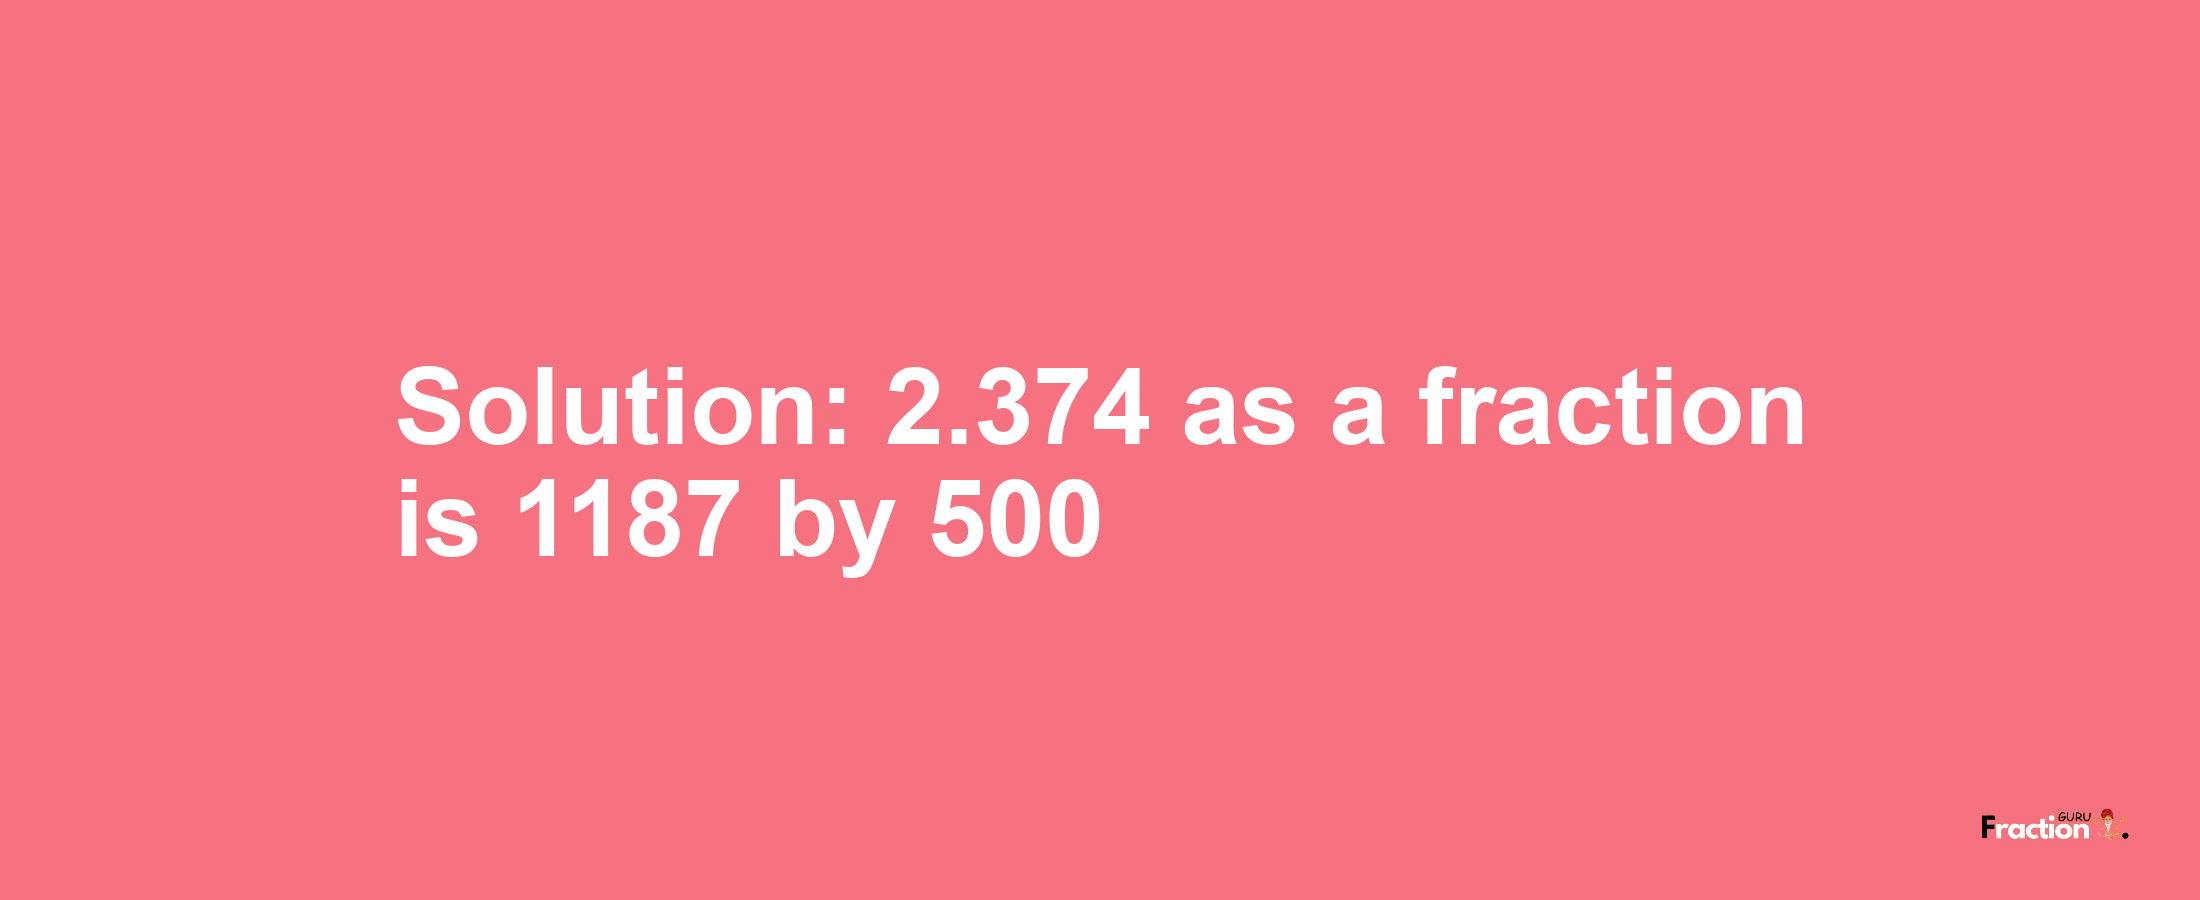 Solution:2.374 as a fraction is 1187/500